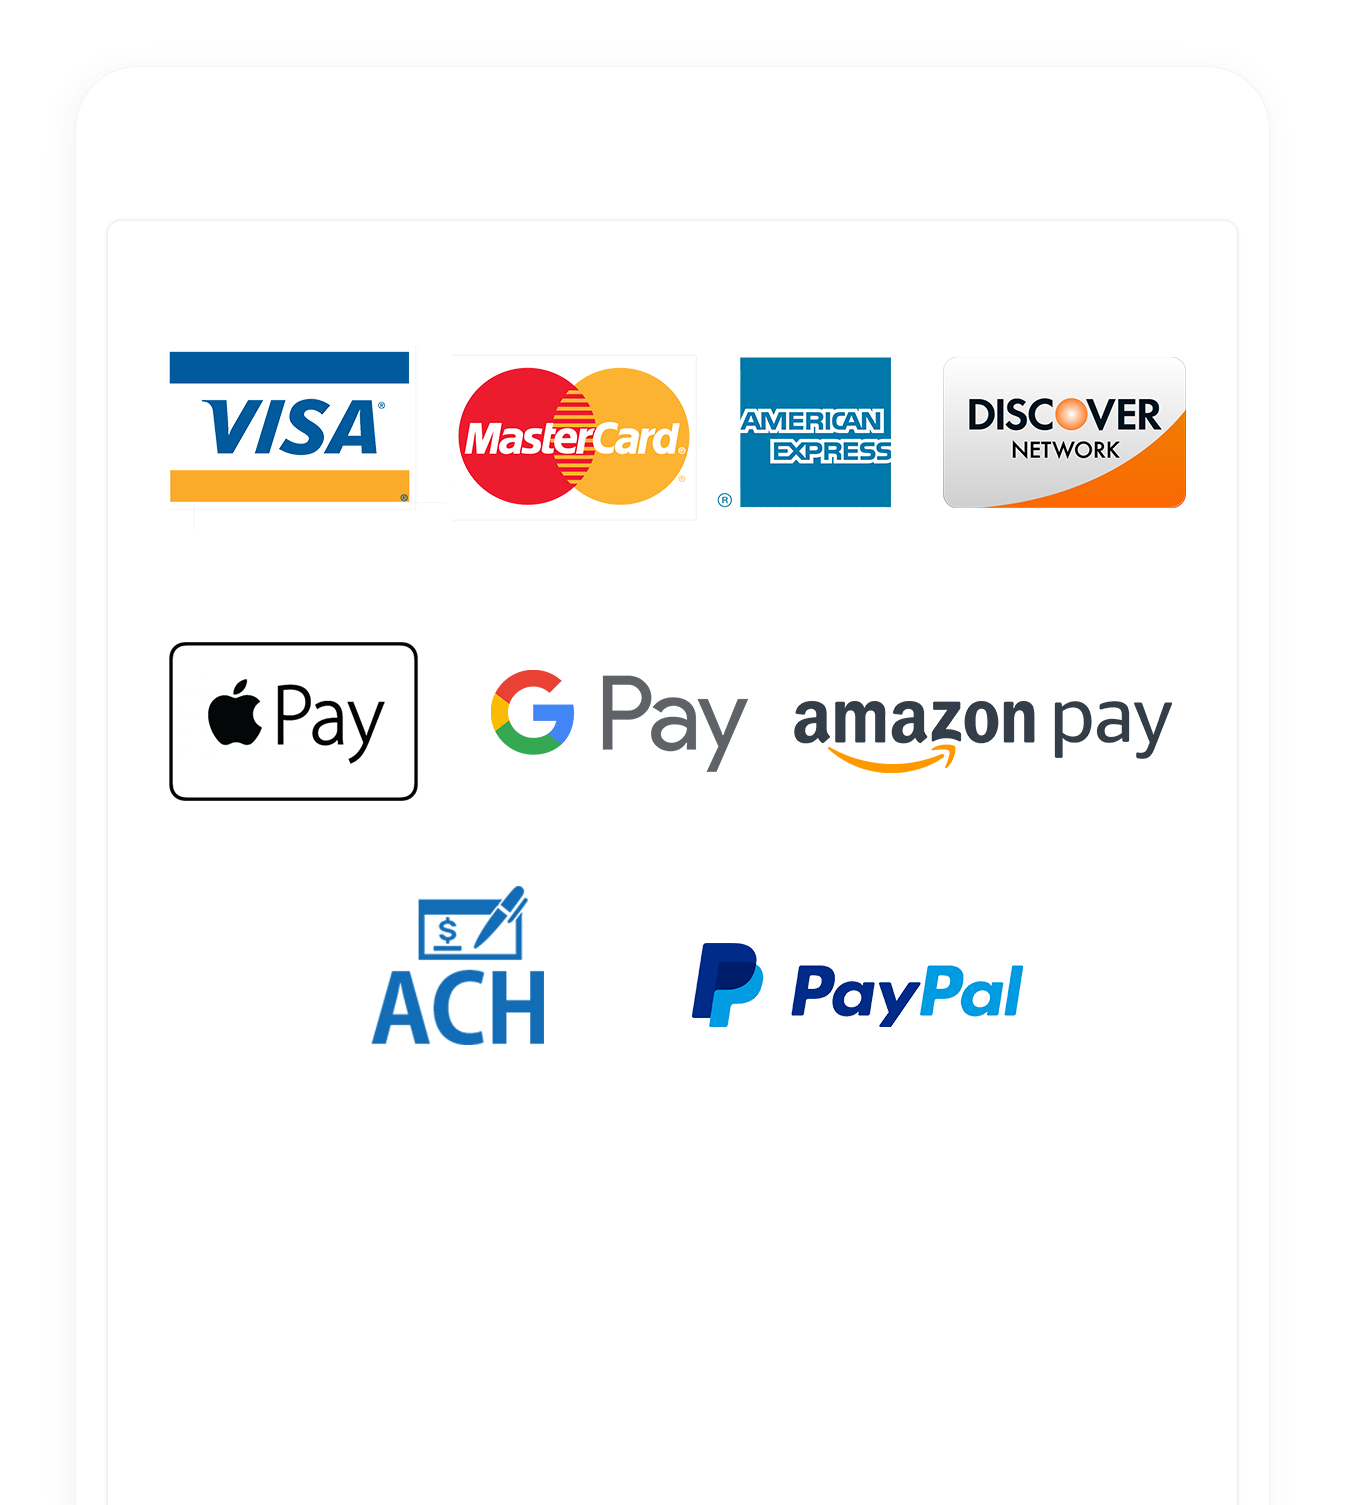 payment-options: Amazon Pay, ACH, apple, google, mastercard, amex, discover, visa, paypal